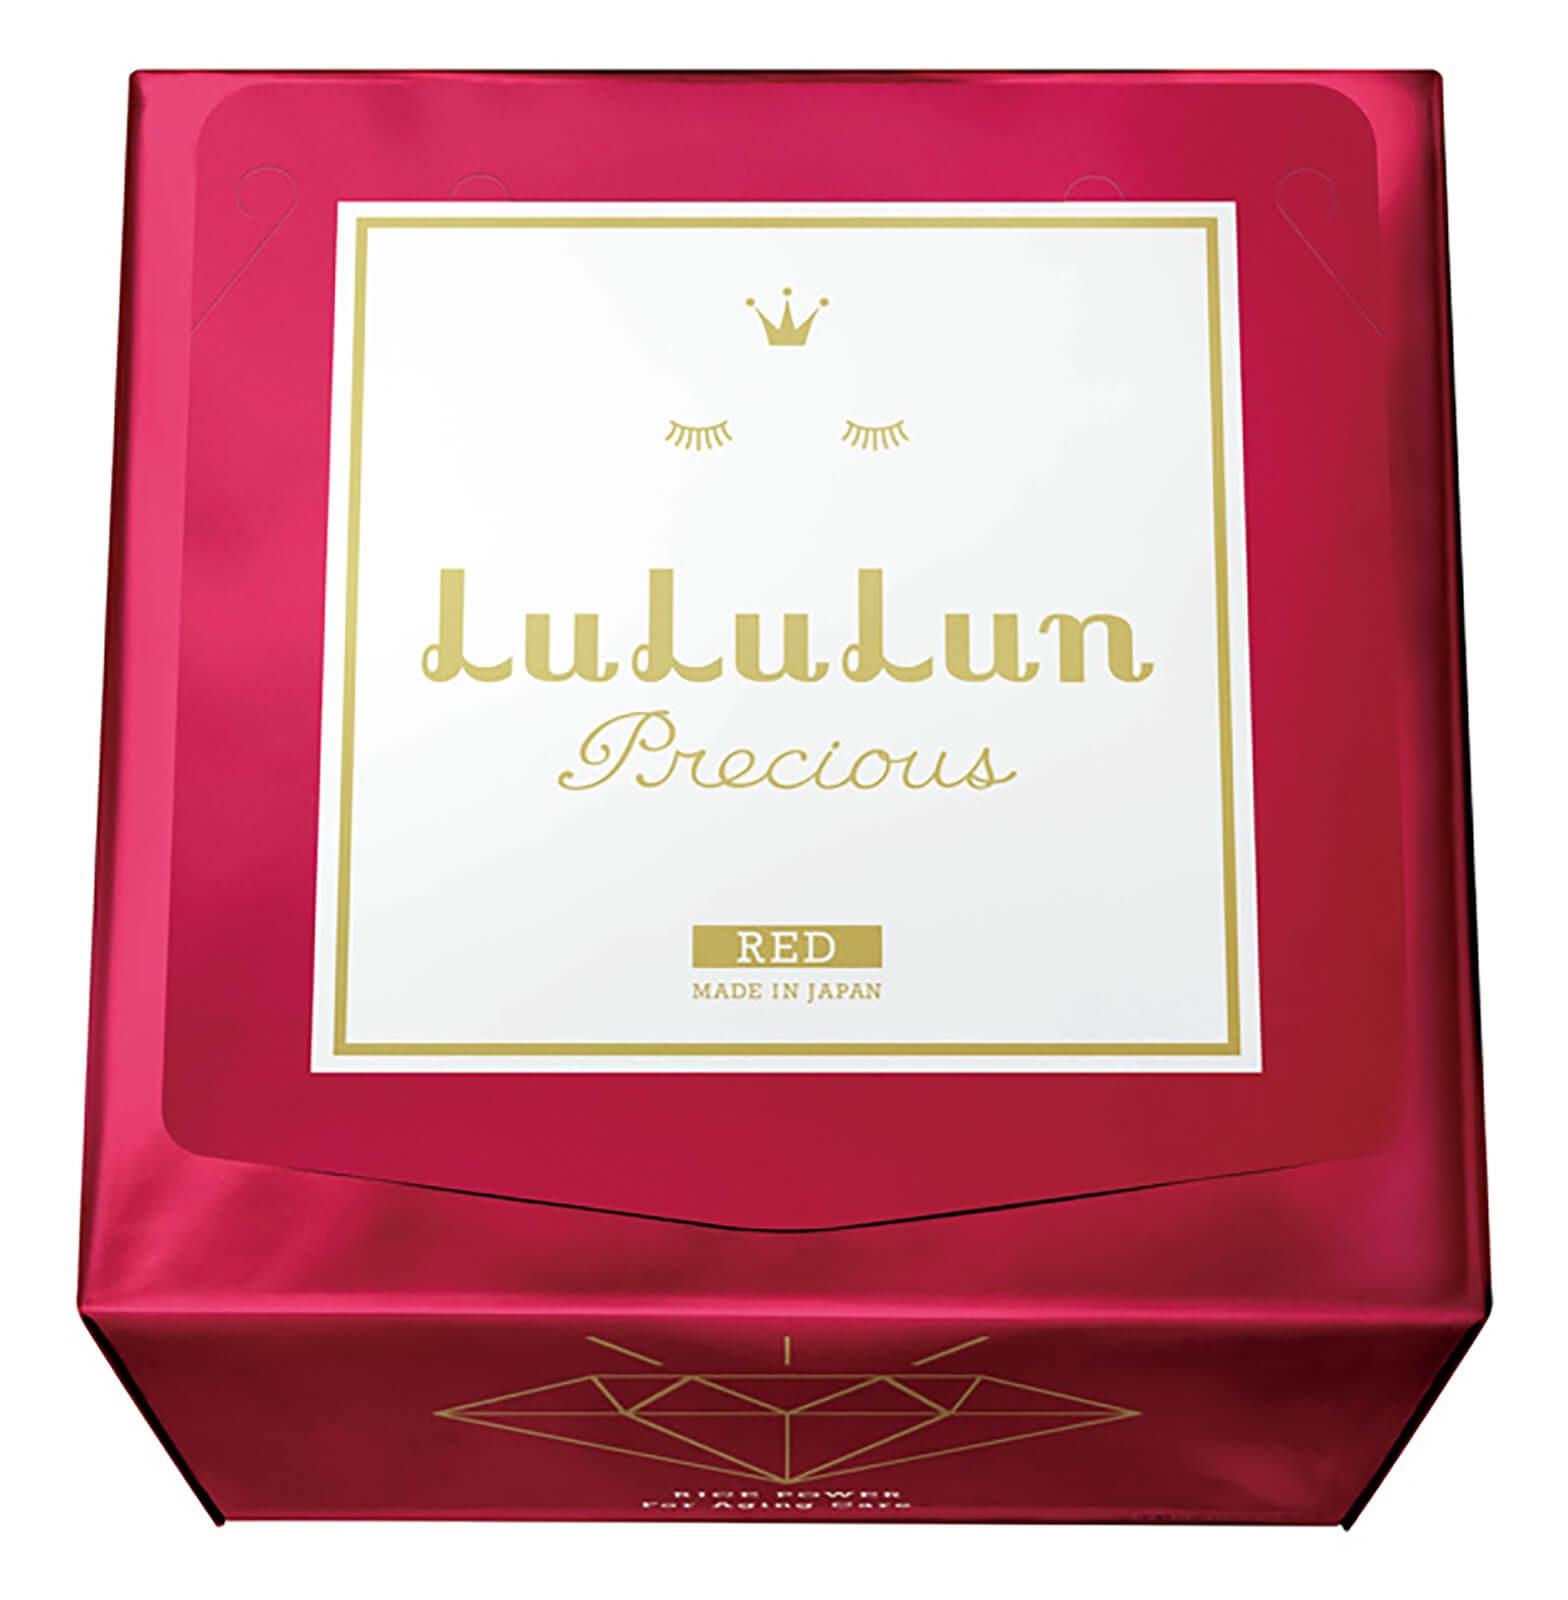 Lululun Precious Face Mask Red